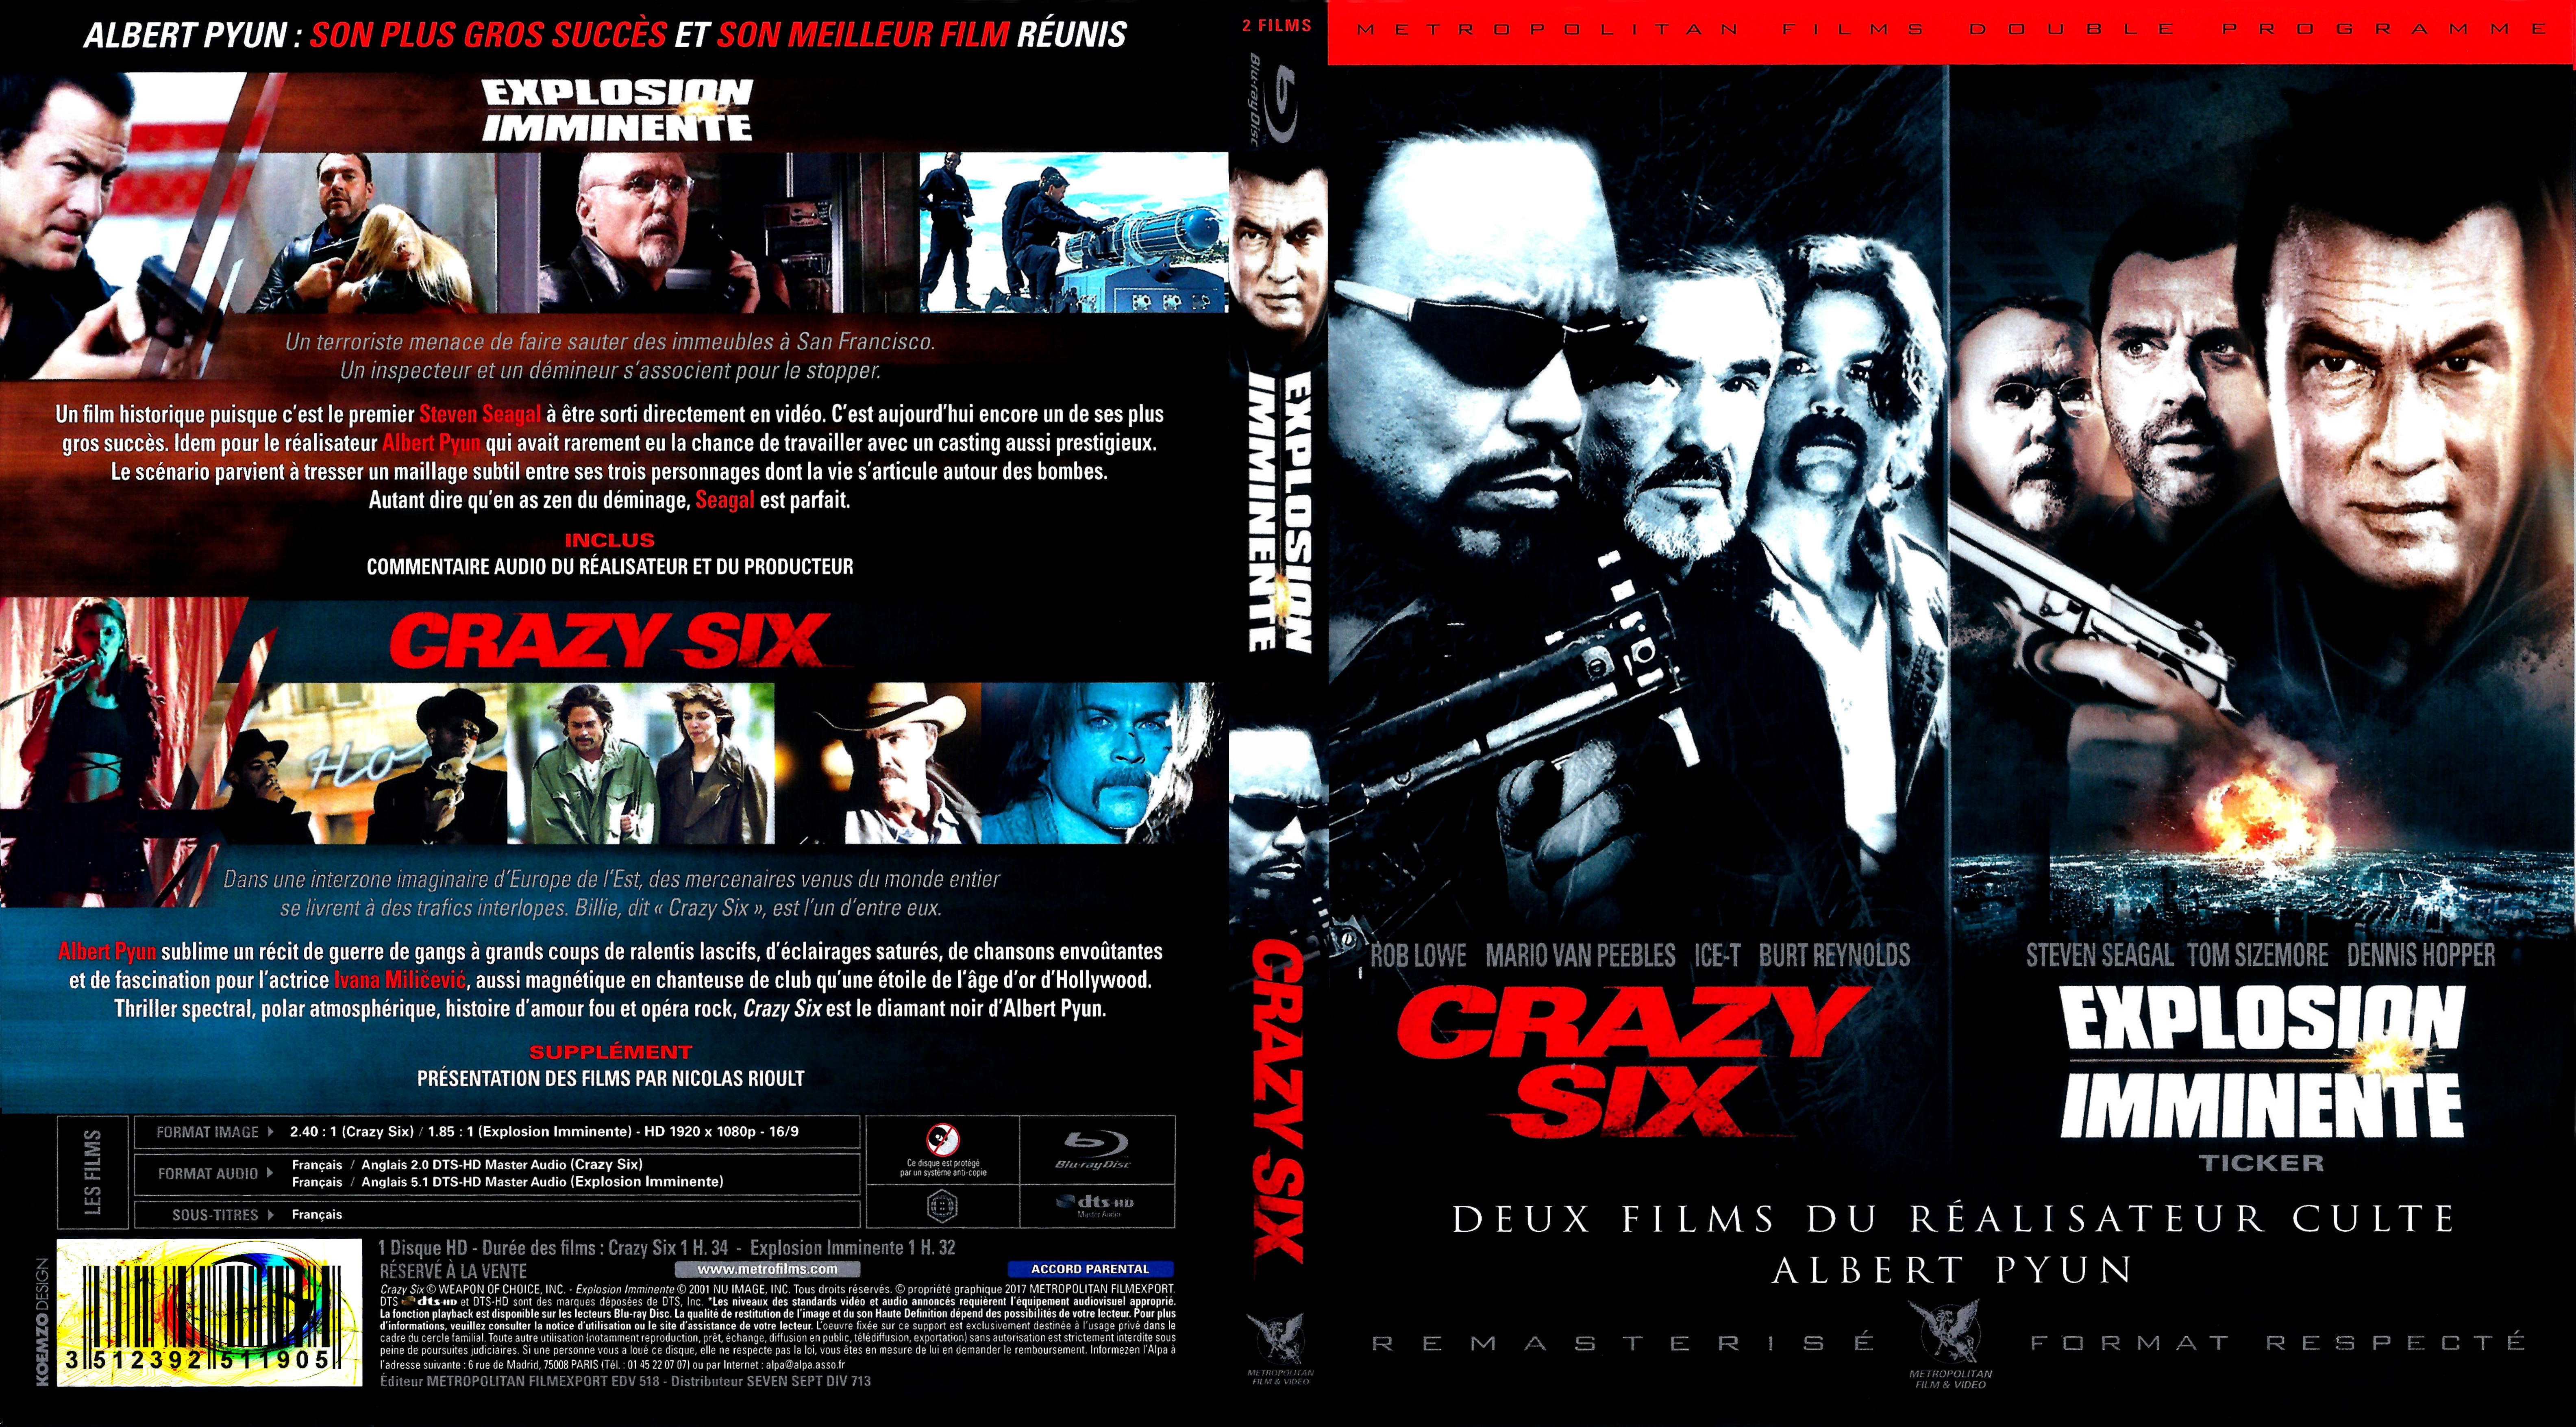 Jaquette DVD Explosion Imminente & Crazy Six (BLU-RAY) 